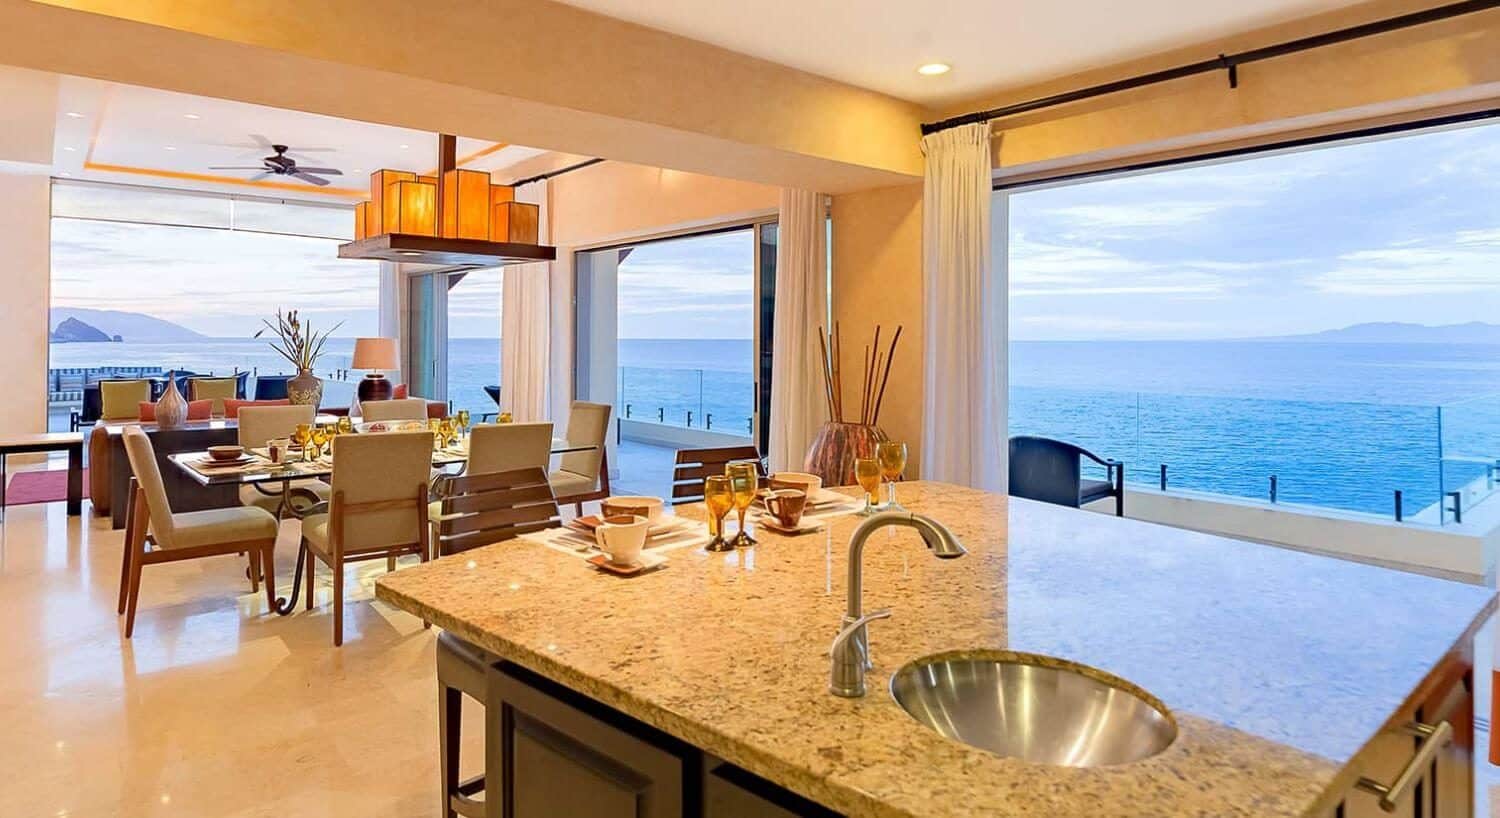 A kitchen island with sink and dining room table and sliding doors opening up to a wrap around terrace with stunning ocean views.